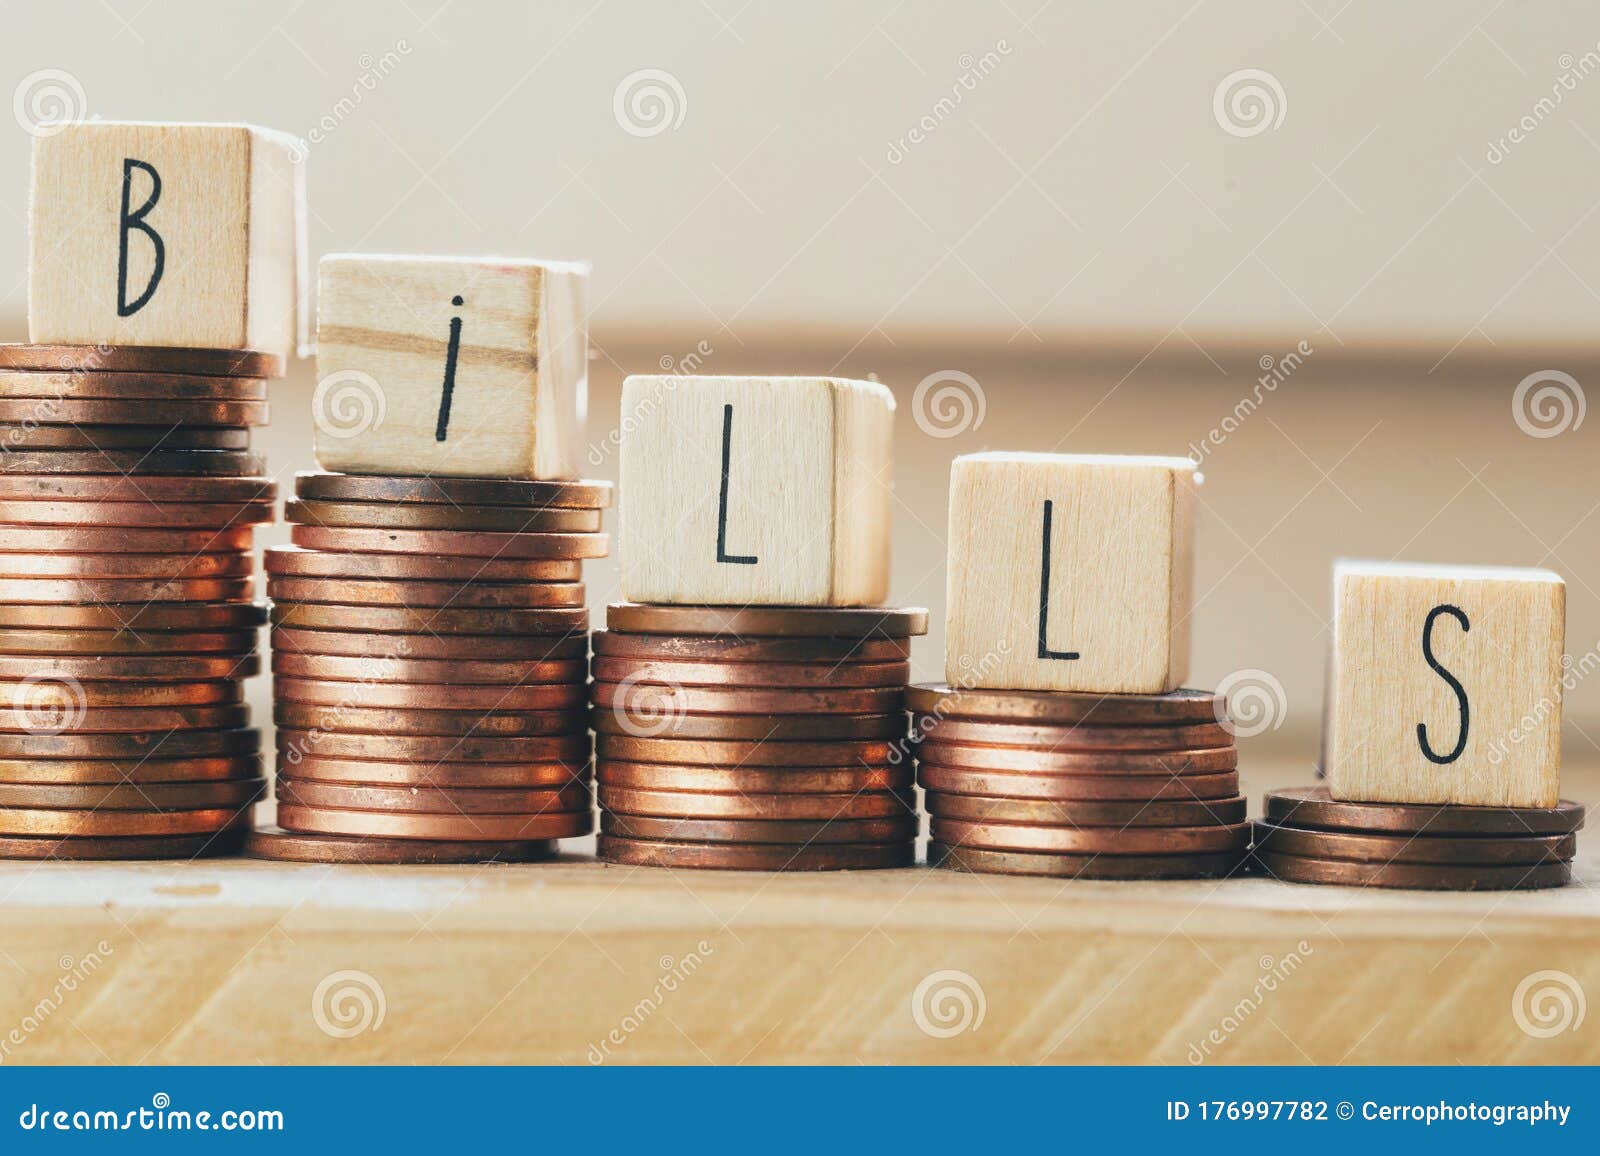 Wooden Blocks With The Word Bills And Pile Of Coins, Money ...